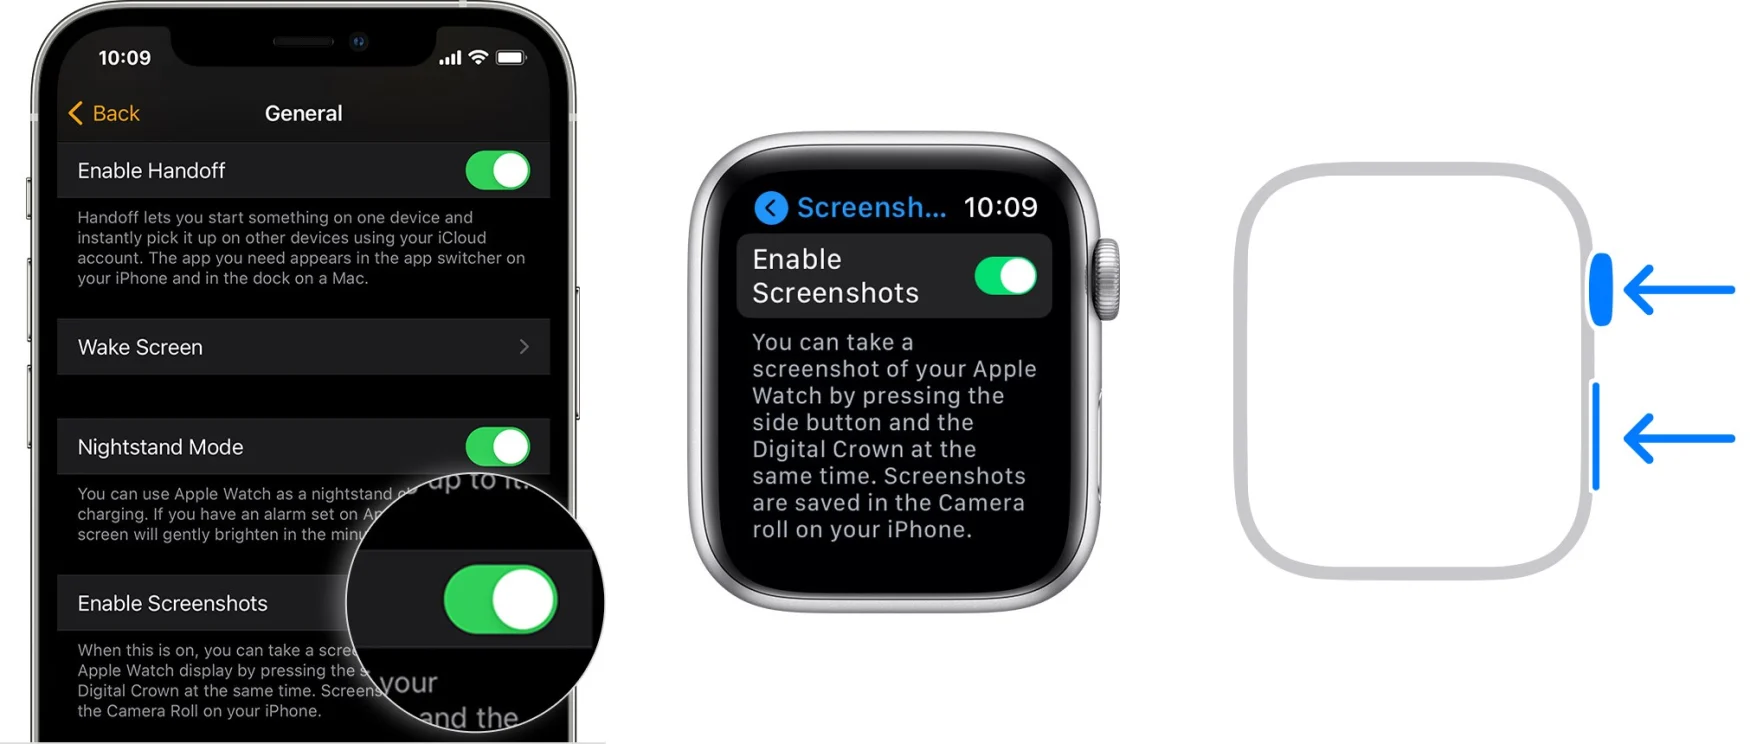 A series of images displaying how to enable and capture screenshots on an Apple Watch.